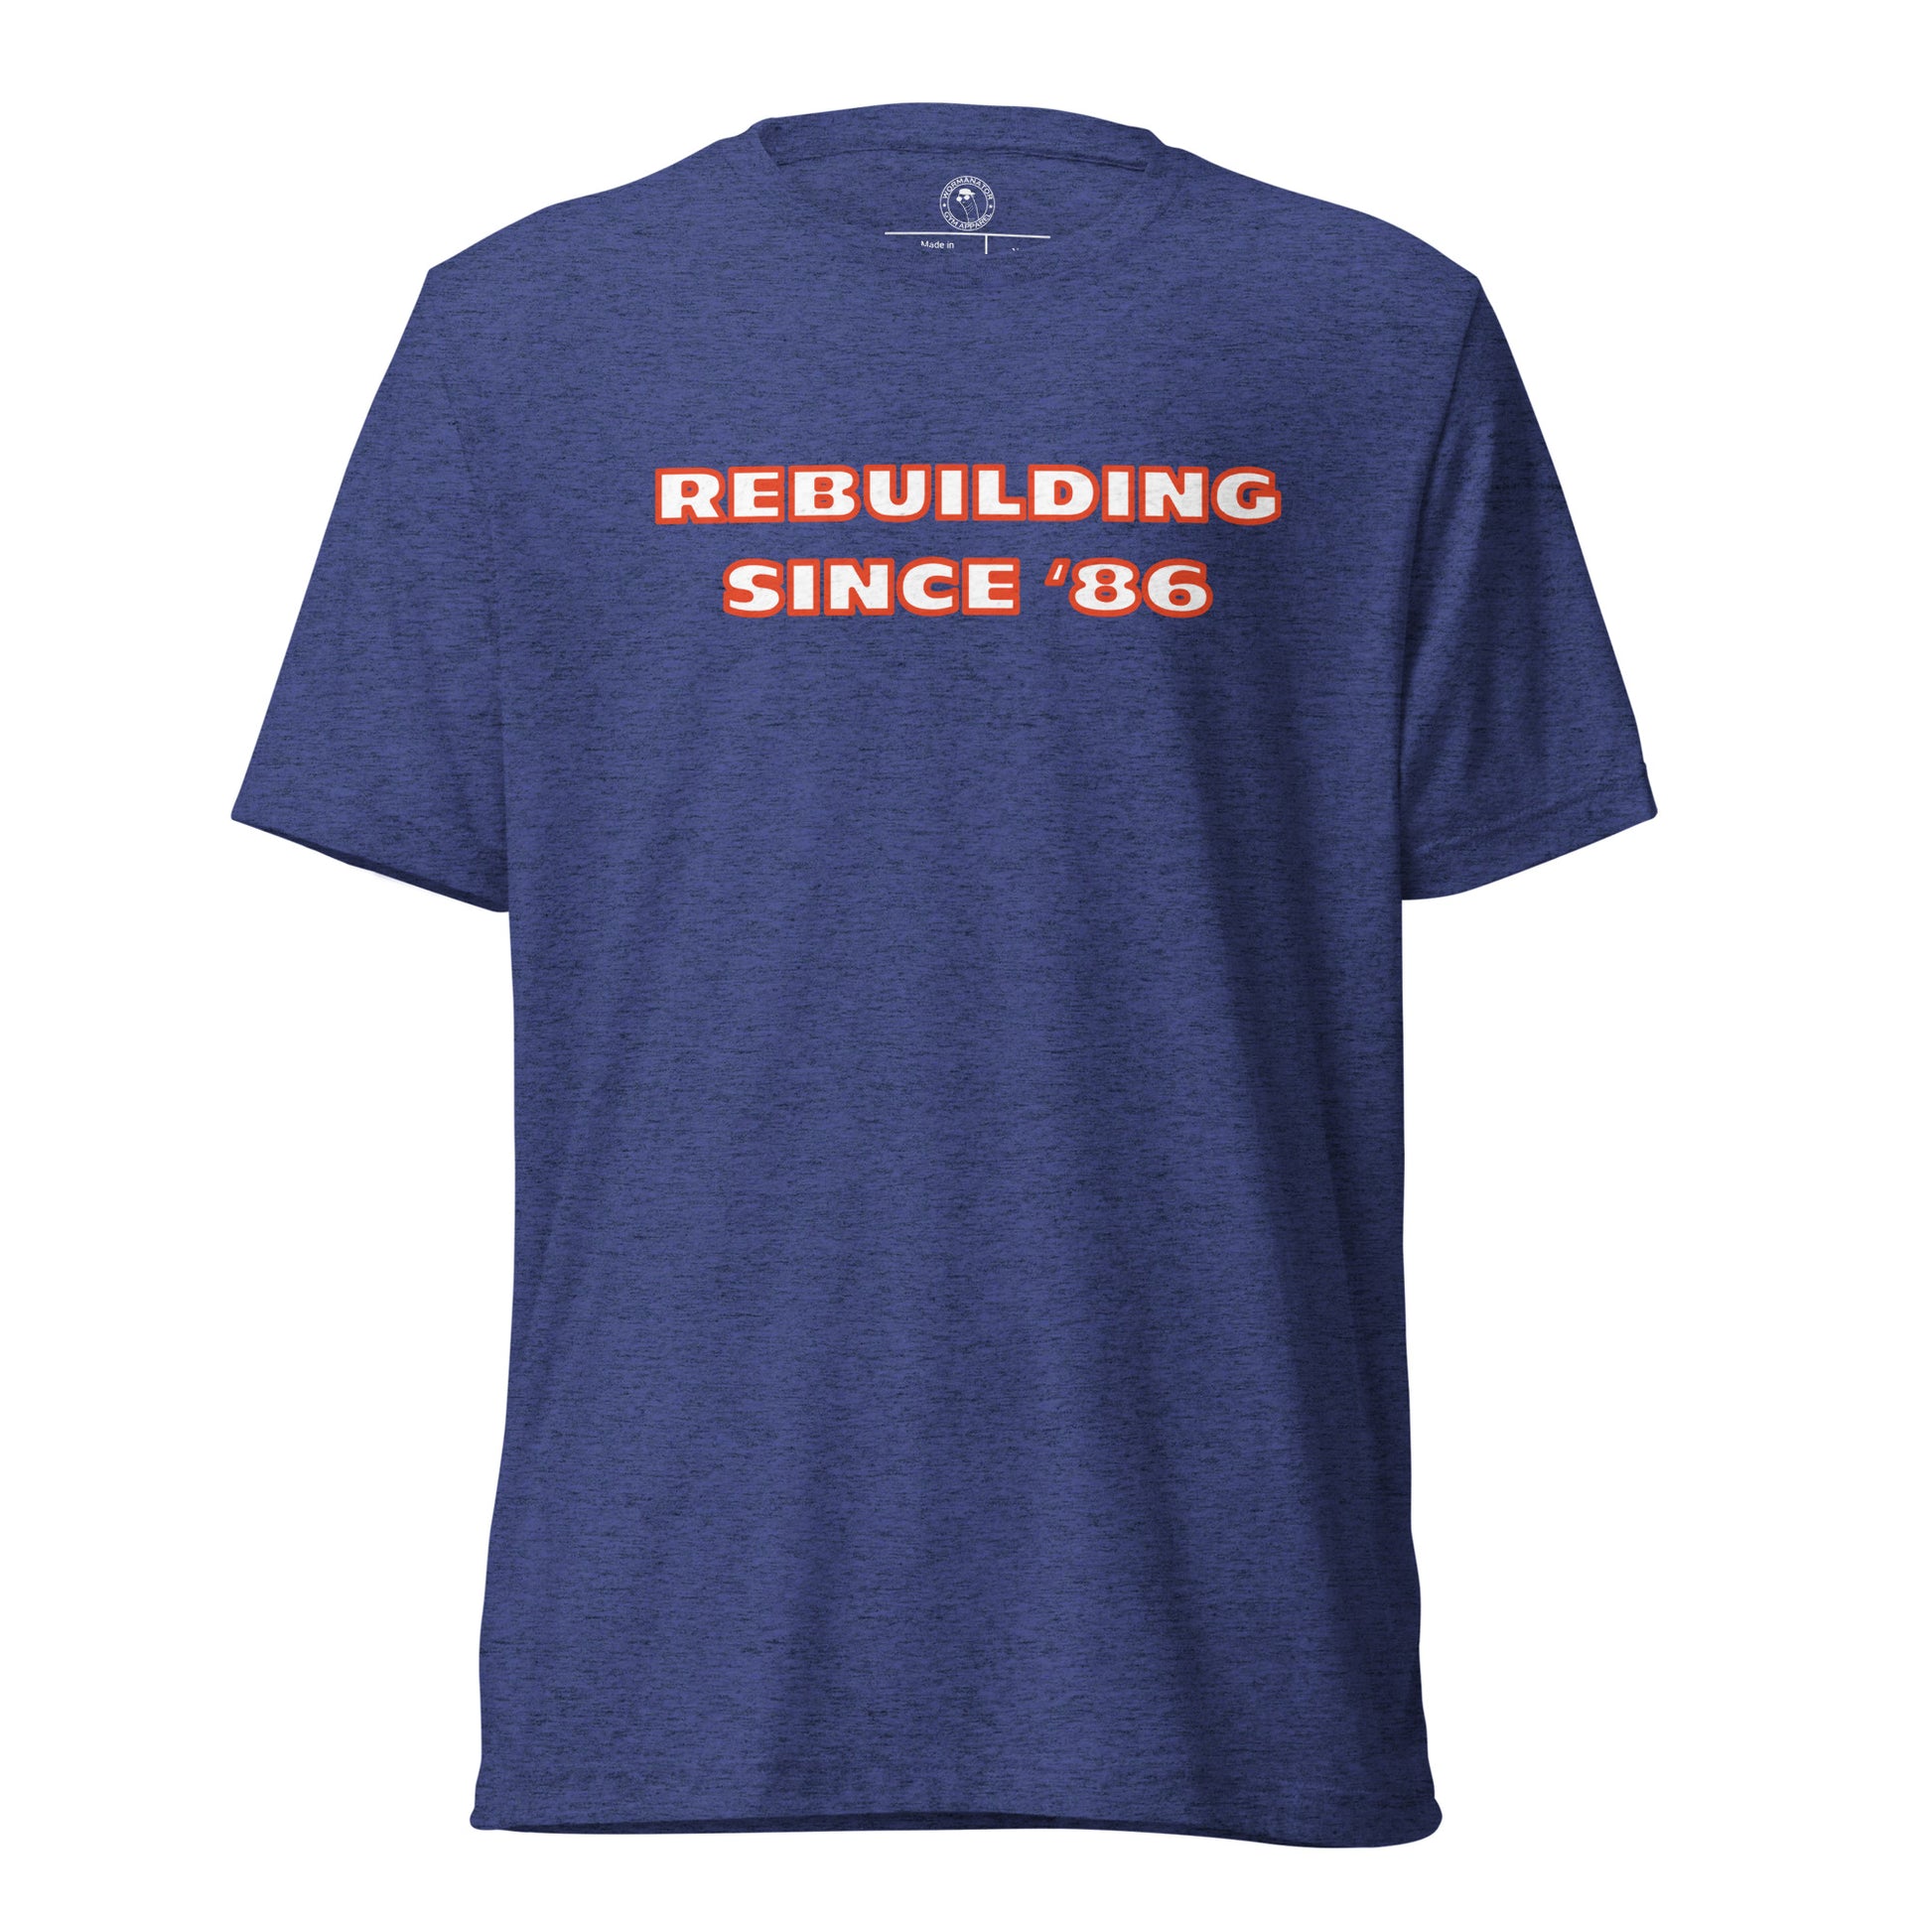 Chicago Bears Rebuilding Since 1986 Shirt in Navy Triblend